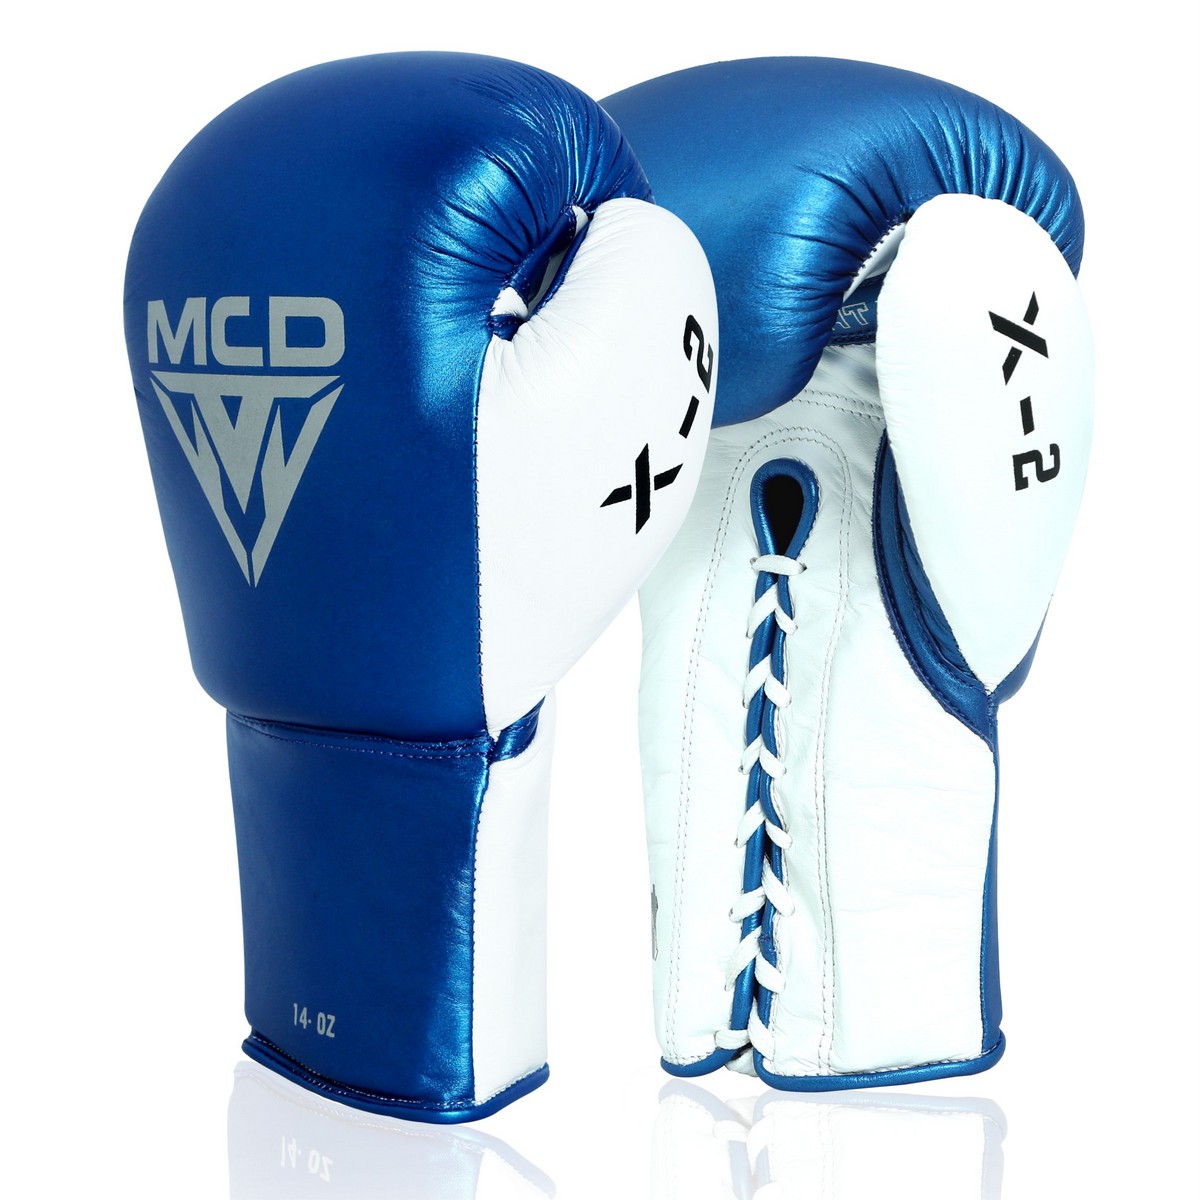 Mcd Professional Gloves X-2 Genuine Leather Made Boxing Gloves, Best Overall Boxing Gloves, Most Durable Bag Gloves, Best Power Punch Bag Gloves For Punching, Most Secure Sparring Gloves, Best Value Professional Gloves